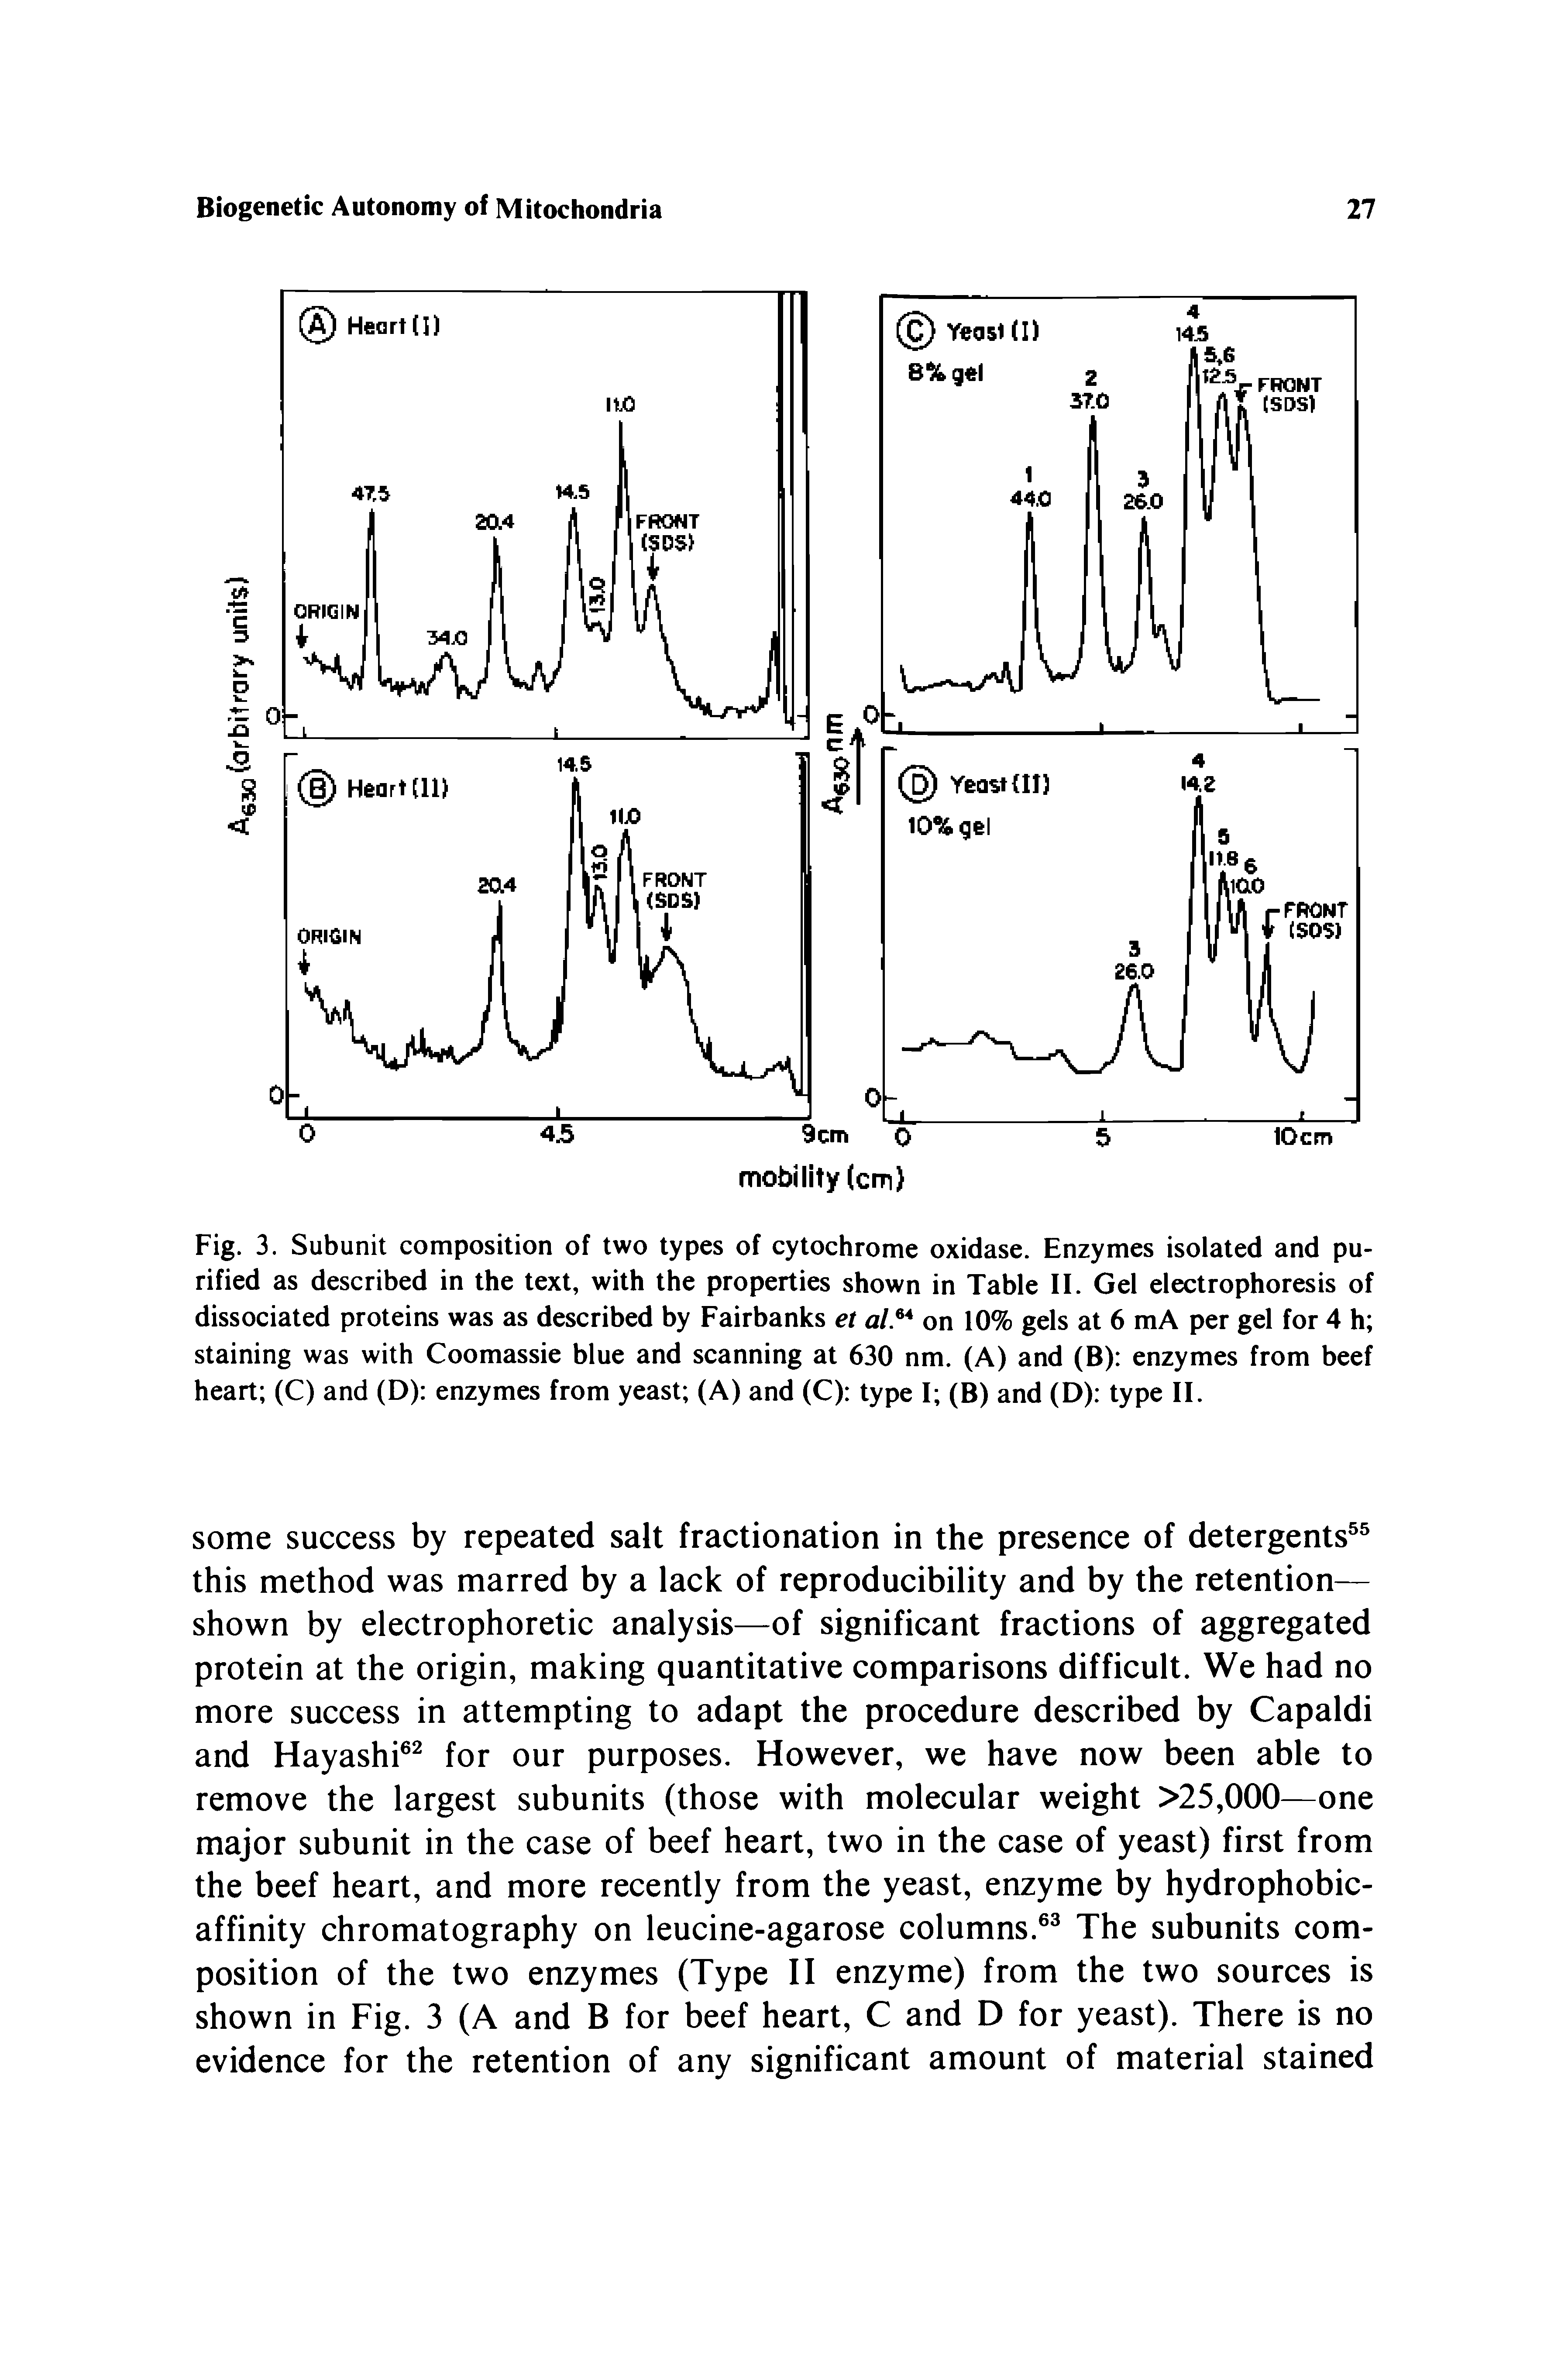 Fig. 3. Subunit composition of two types of cytochrome oxidase. Enzymes isolated and purified as described in the text, with the properties shown in Table II. Gel electrophoresis of dissociated proteins was as described by Fairbanks et al. on 10% gels at 6 mA per gel for 4 h staining was with Coomassie blue and scanning at 630 nm. (A) and (B) enzymes from beef heart (C) and (D) enzymes from yeast (A) and (C) type I (B) and (D) type II.